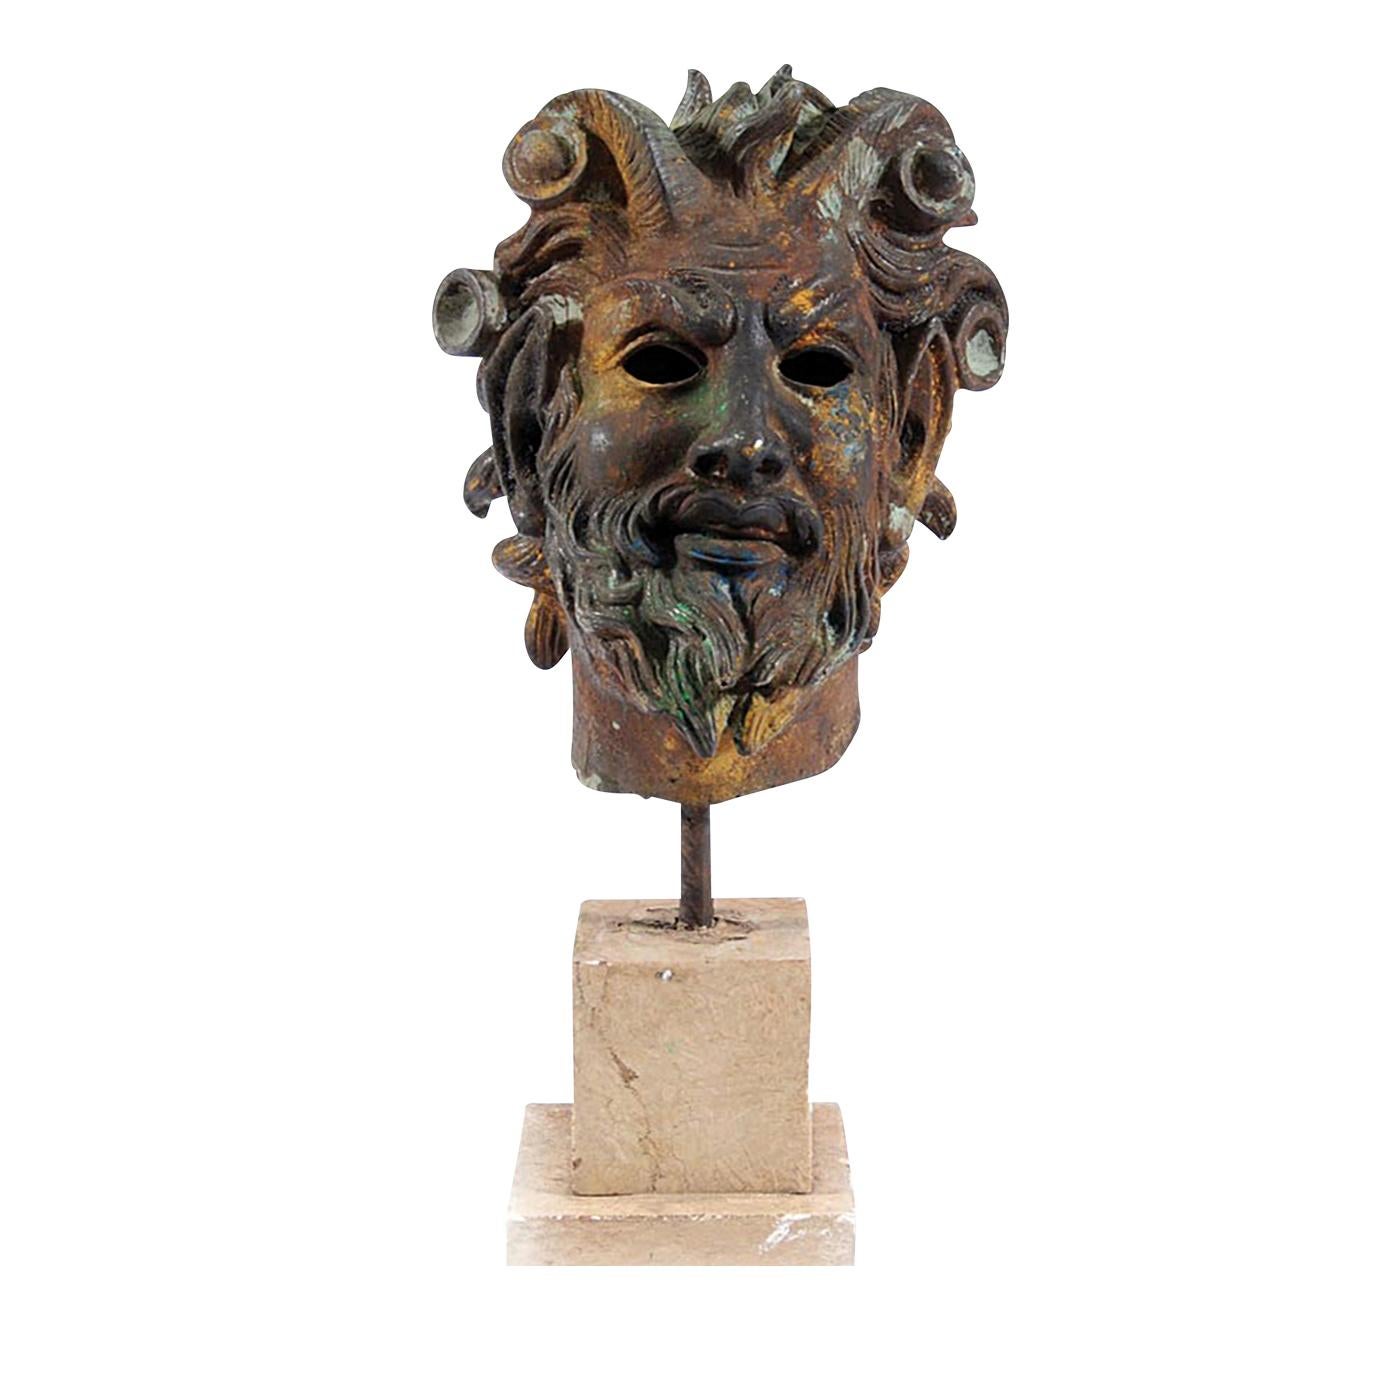 This exquisite piece represents the head of a bearded faun, clearly depicted with his goat horns and elongated ears. The faun was the Roman equivalent of the ancient Greek satyr, a mythological half human-half goat creature, manifestation of forest